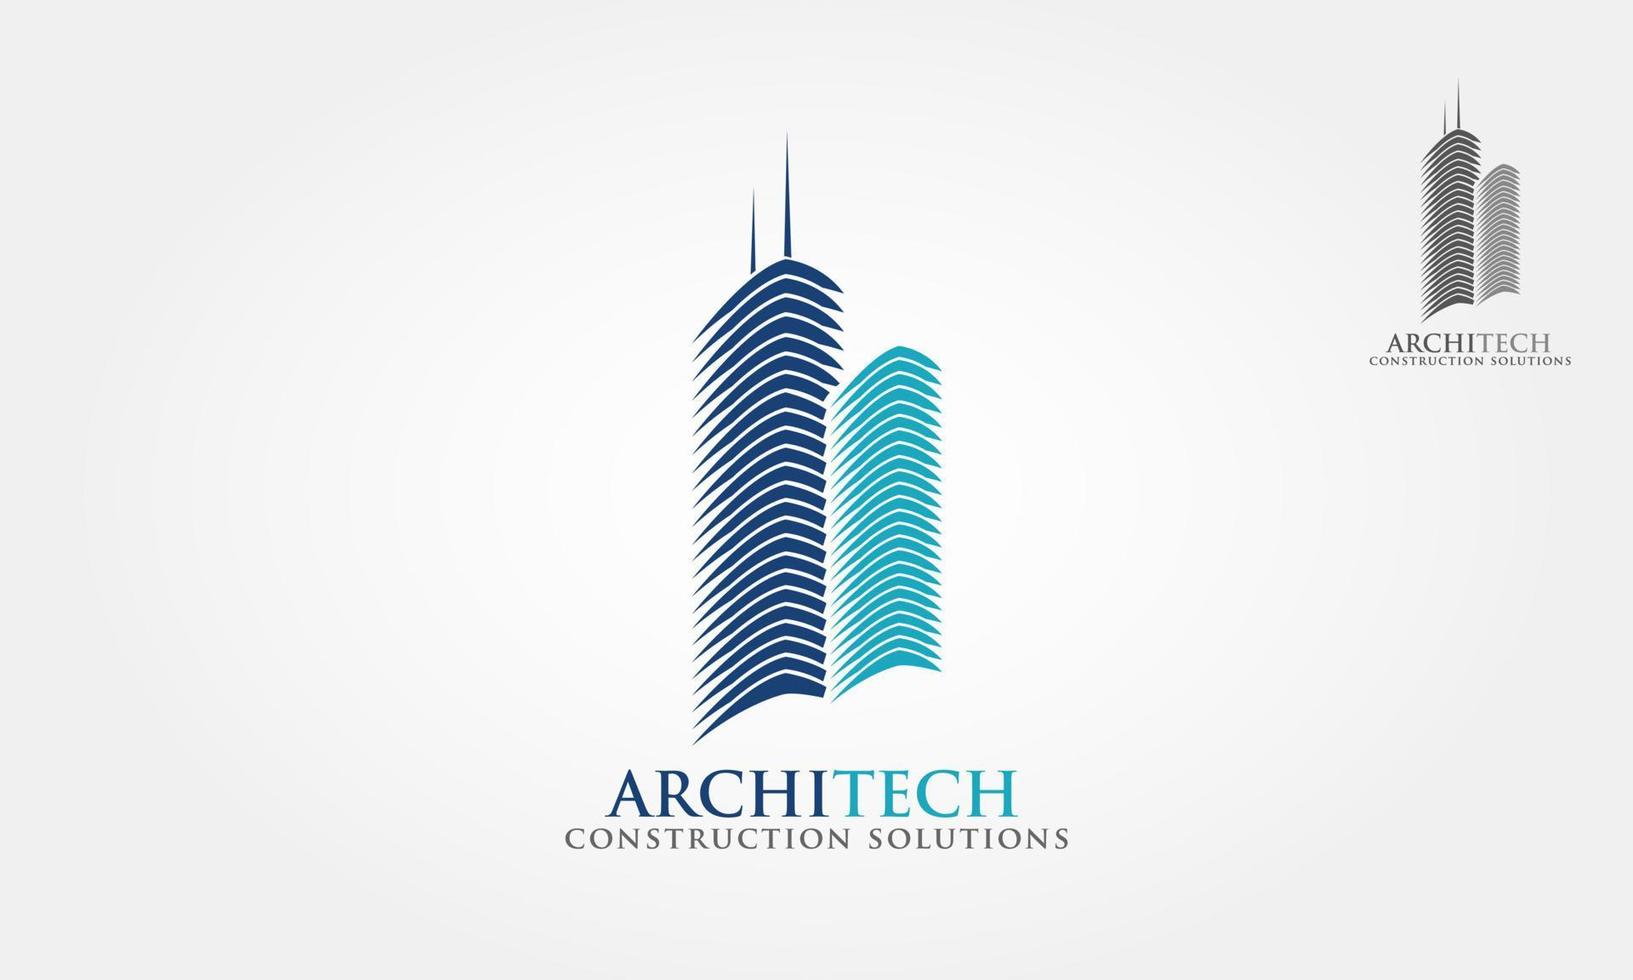 Construction Solutions Vector Logo Template.  Architect Construction Idea. Logo of a stylized and abstract buildings.